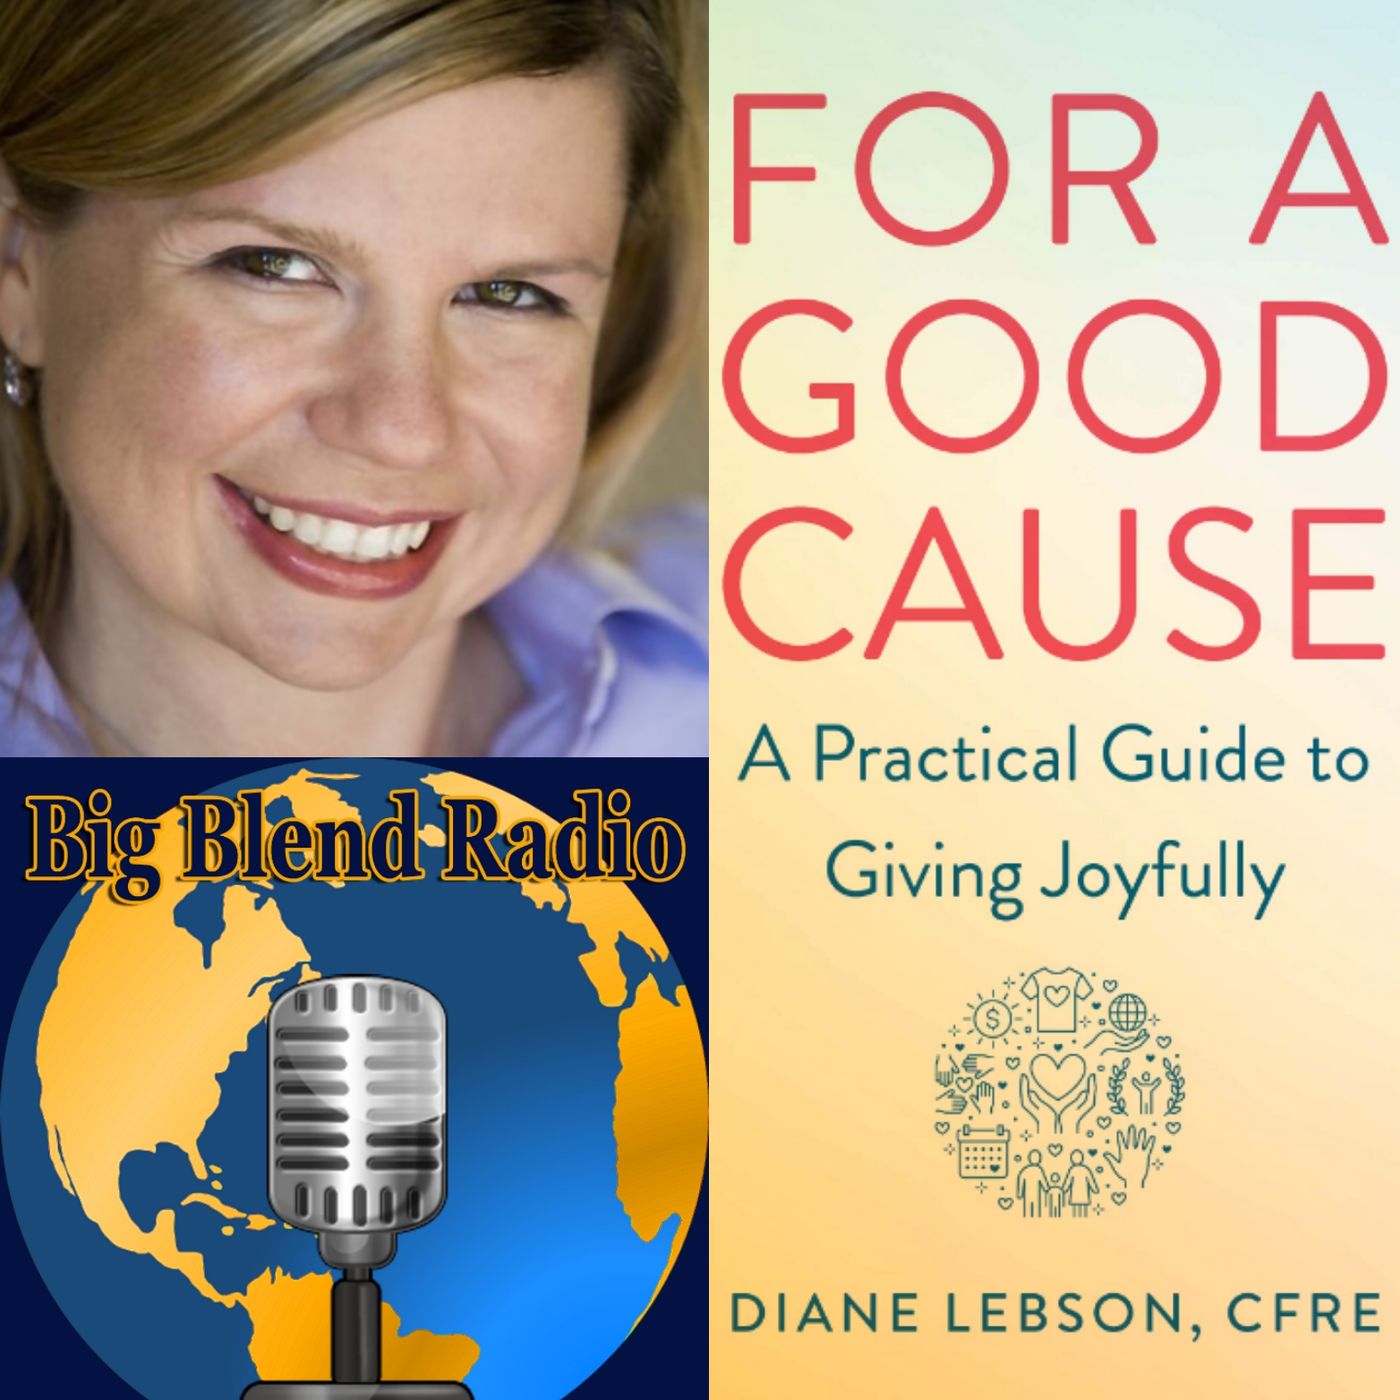 Diane Lebson - For a Good Cause